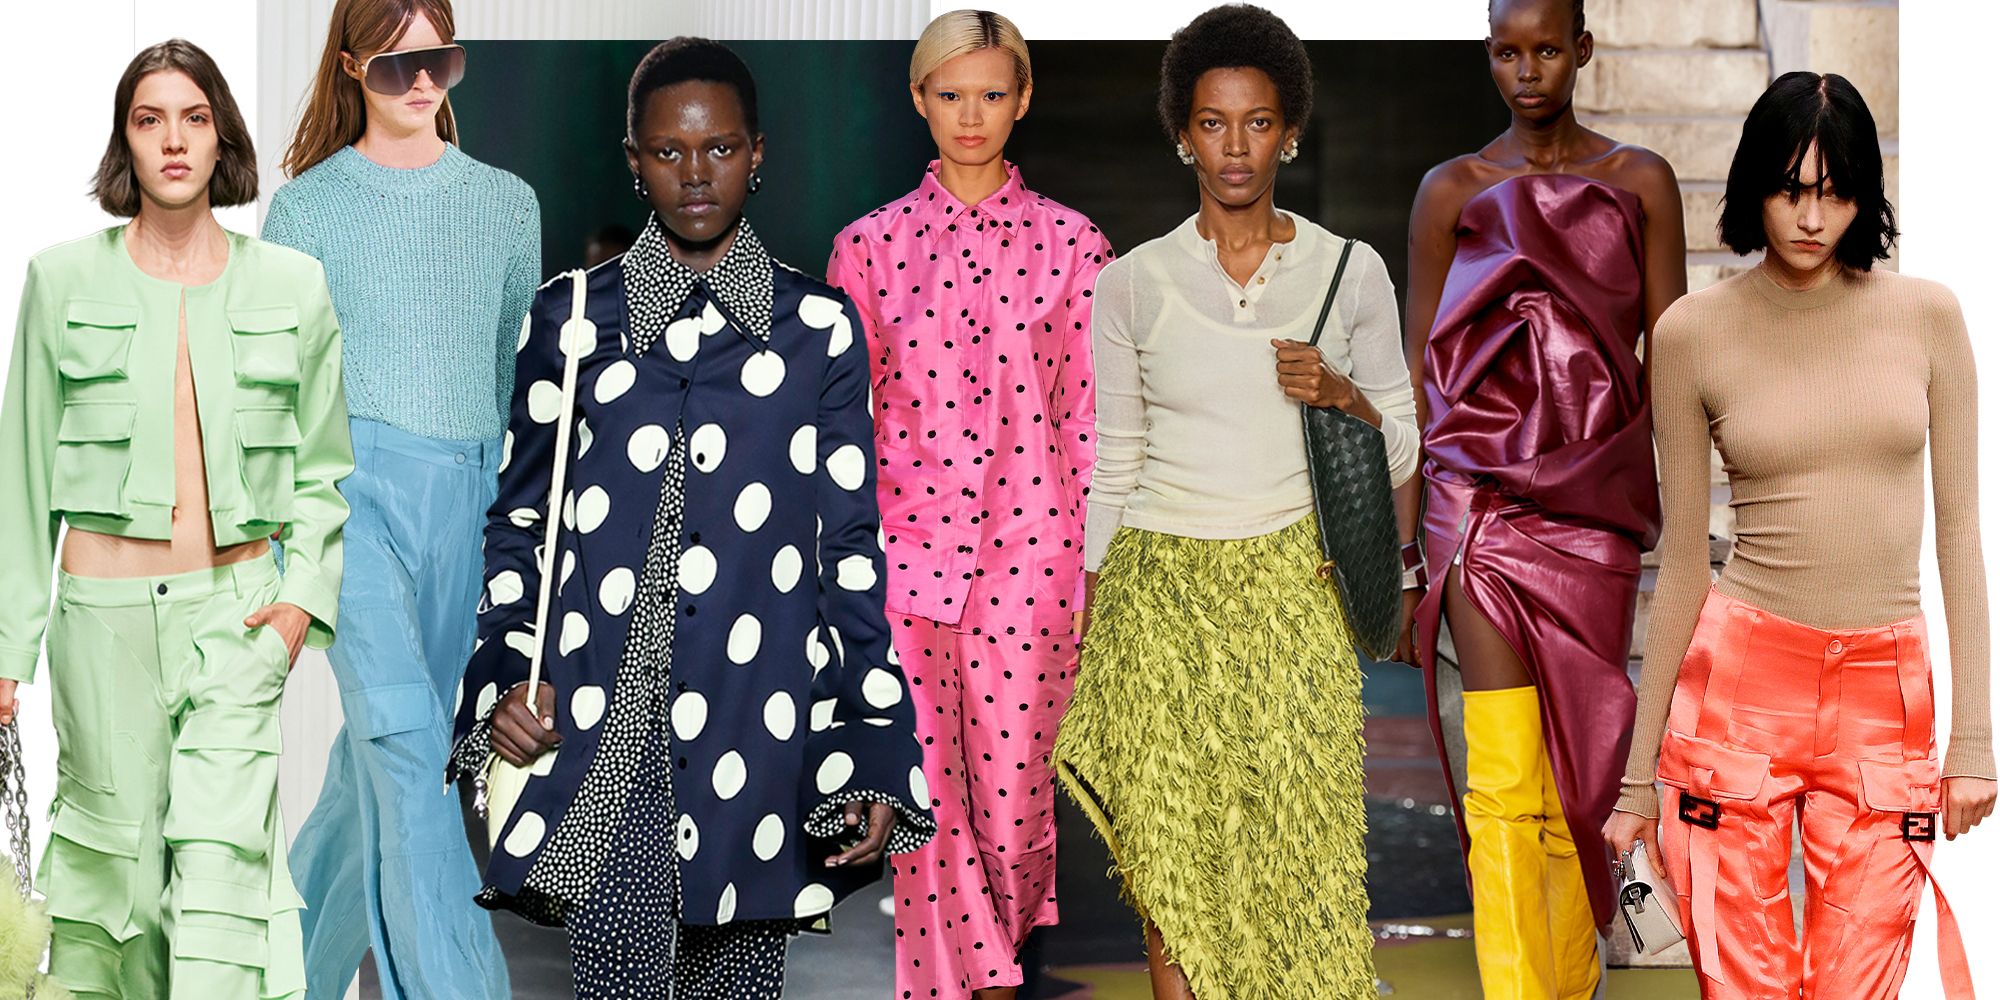 Zara's autumn/winter collection proves polka dots are here to stay